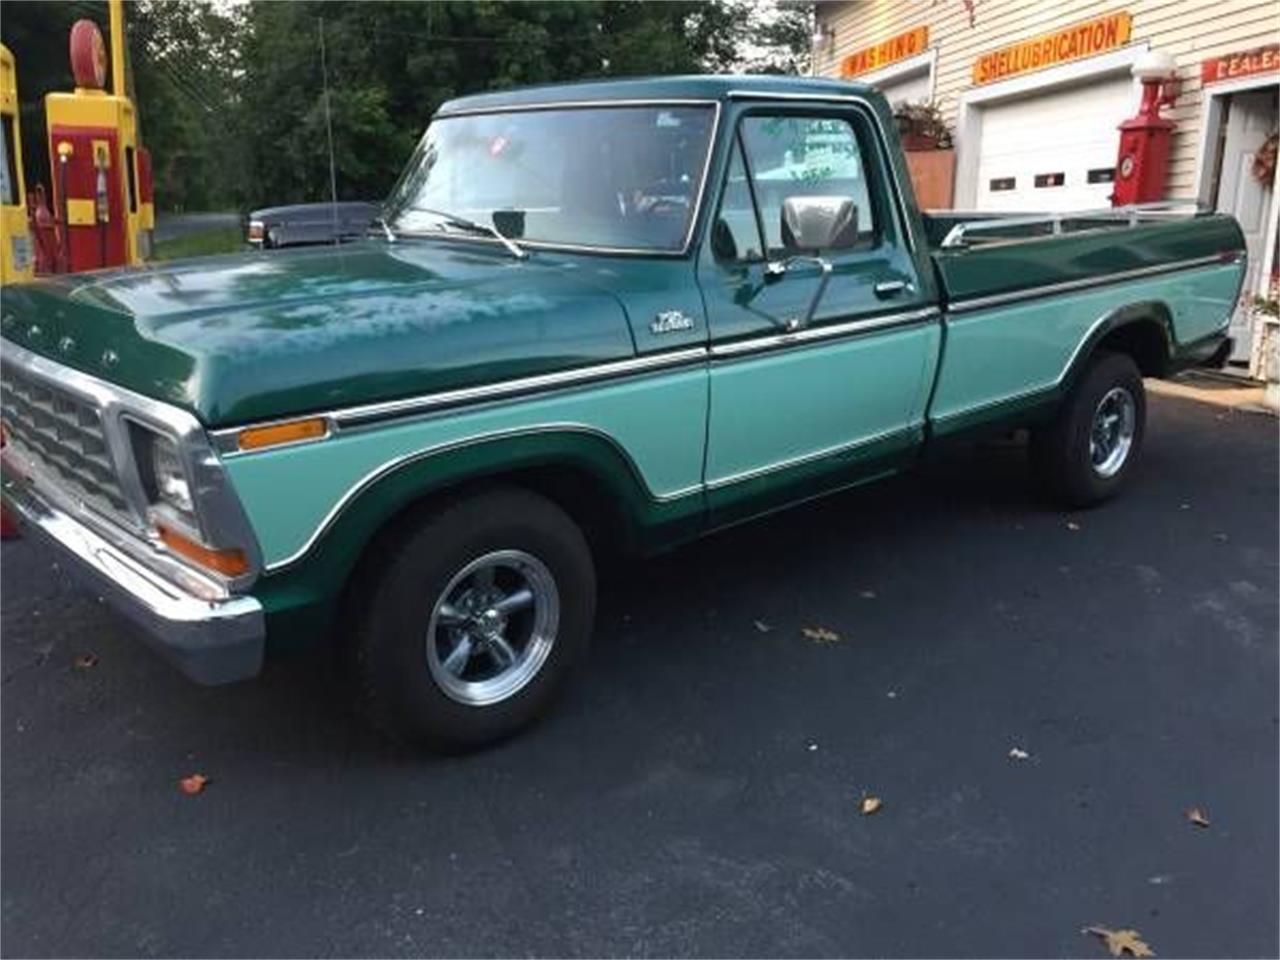 1979 ford f100 for sale classiccars com cc 1204831 1979 ford f100 for sale classiccars